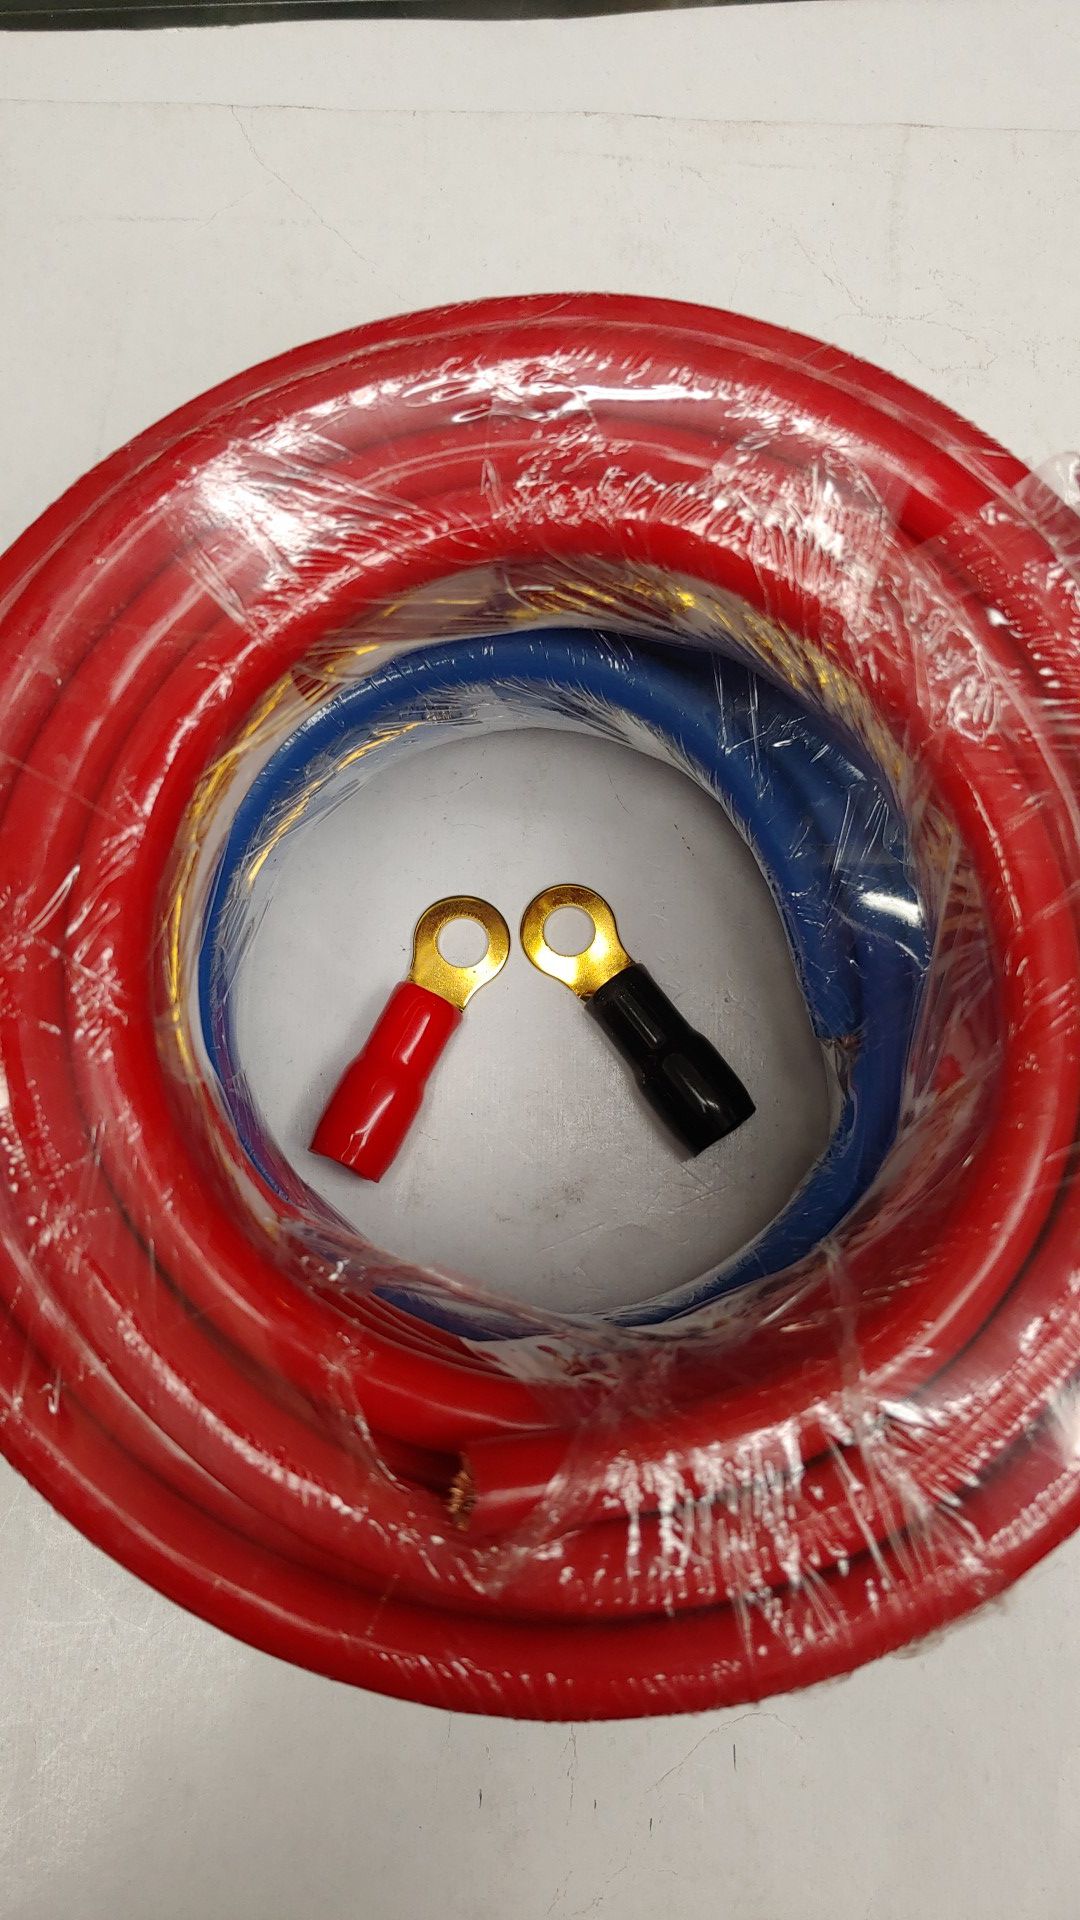 Car audio accessories : 4 gauge 25 feet CCA high performance power cable 1 red 1 blue & ring terminal 1 red 1 black